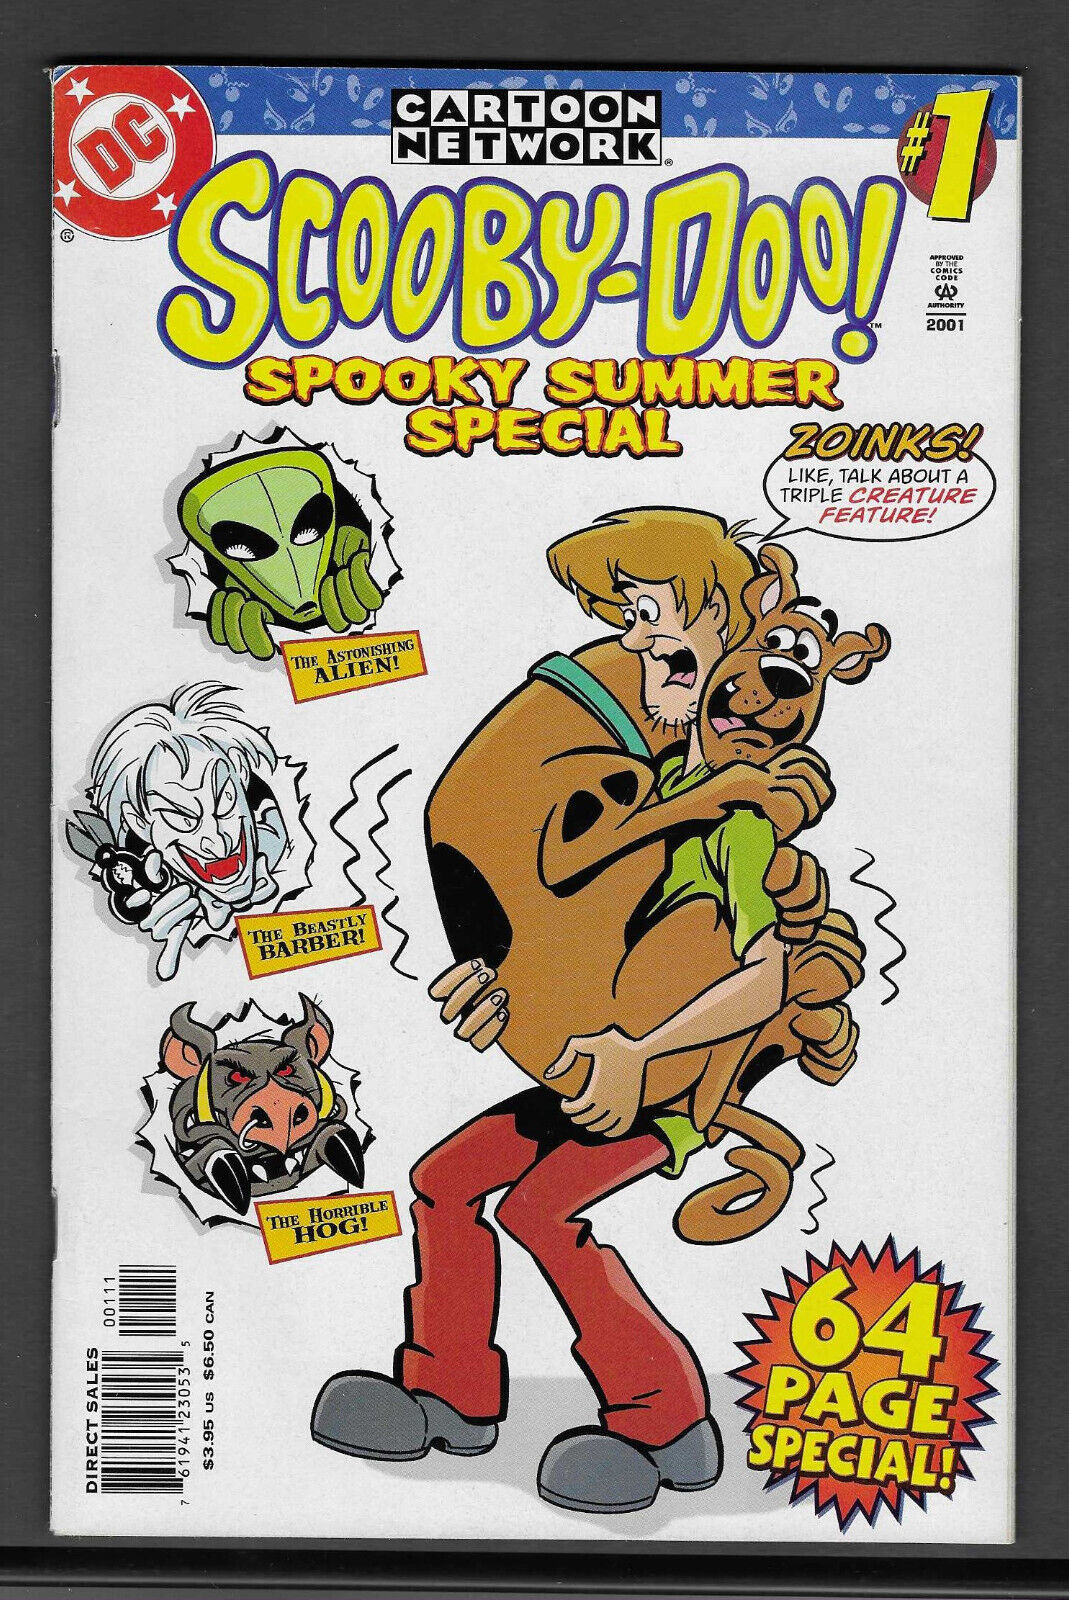 Scooby-Doo Spooky Summer Special #1 (2001 1st Print Direct Sale Edition) Fine+